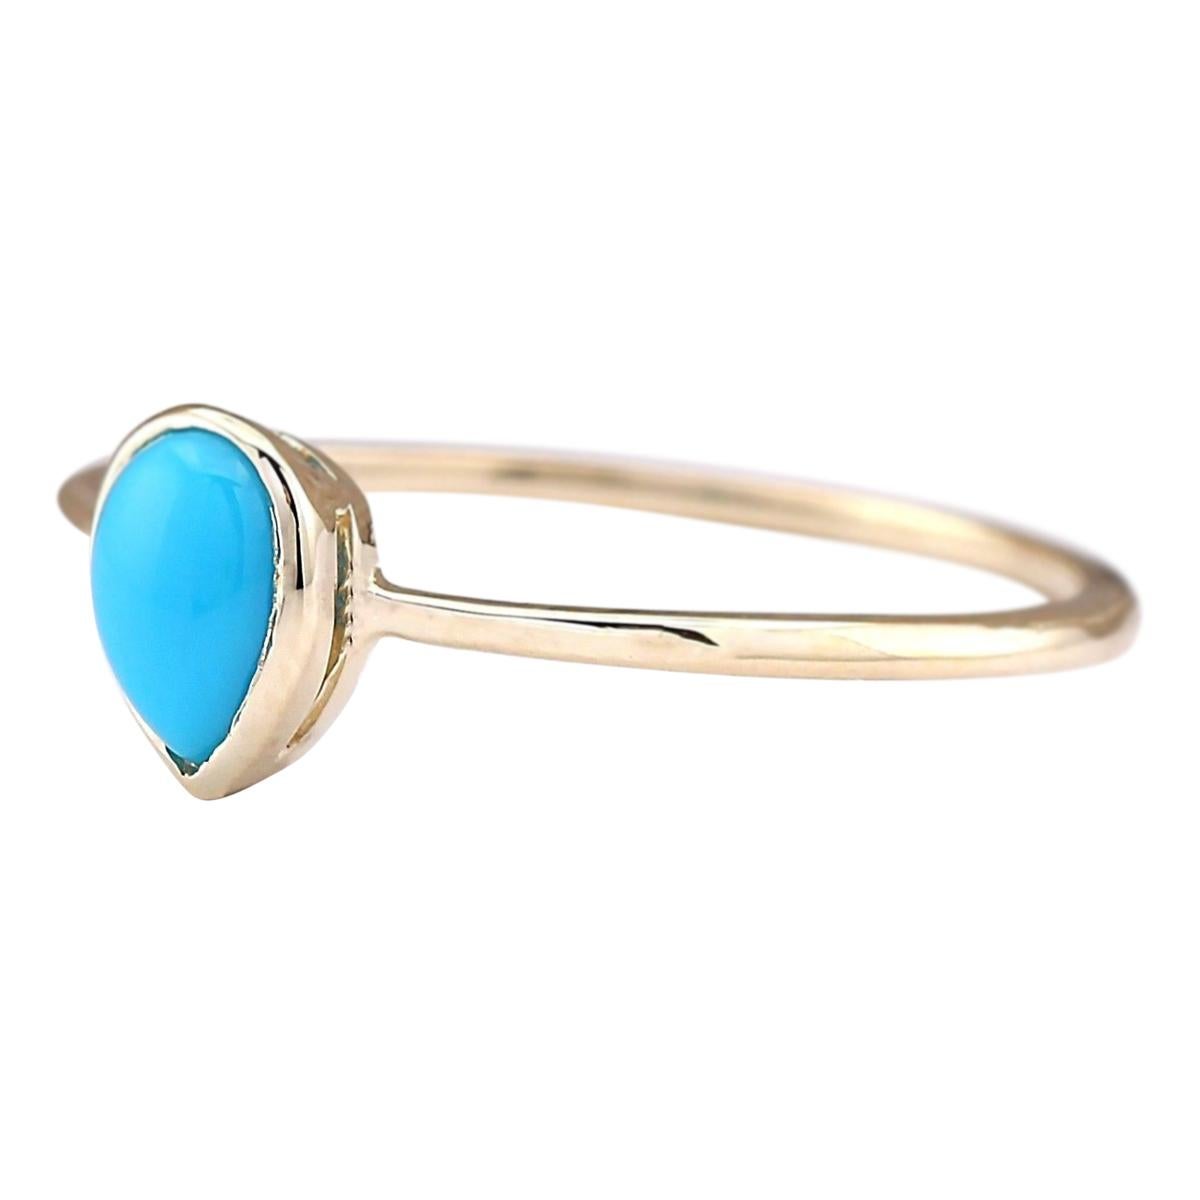 Introducing our exquisite 14 Karat Yellow Gold Ring featuring a captivating 0.40 Carat Natural Turquoise centerpiece. Stamped for authenticity, this ring weighs a mere 1.1 grams, ensuring comfort and wearability. The natural turquoise gemstone,